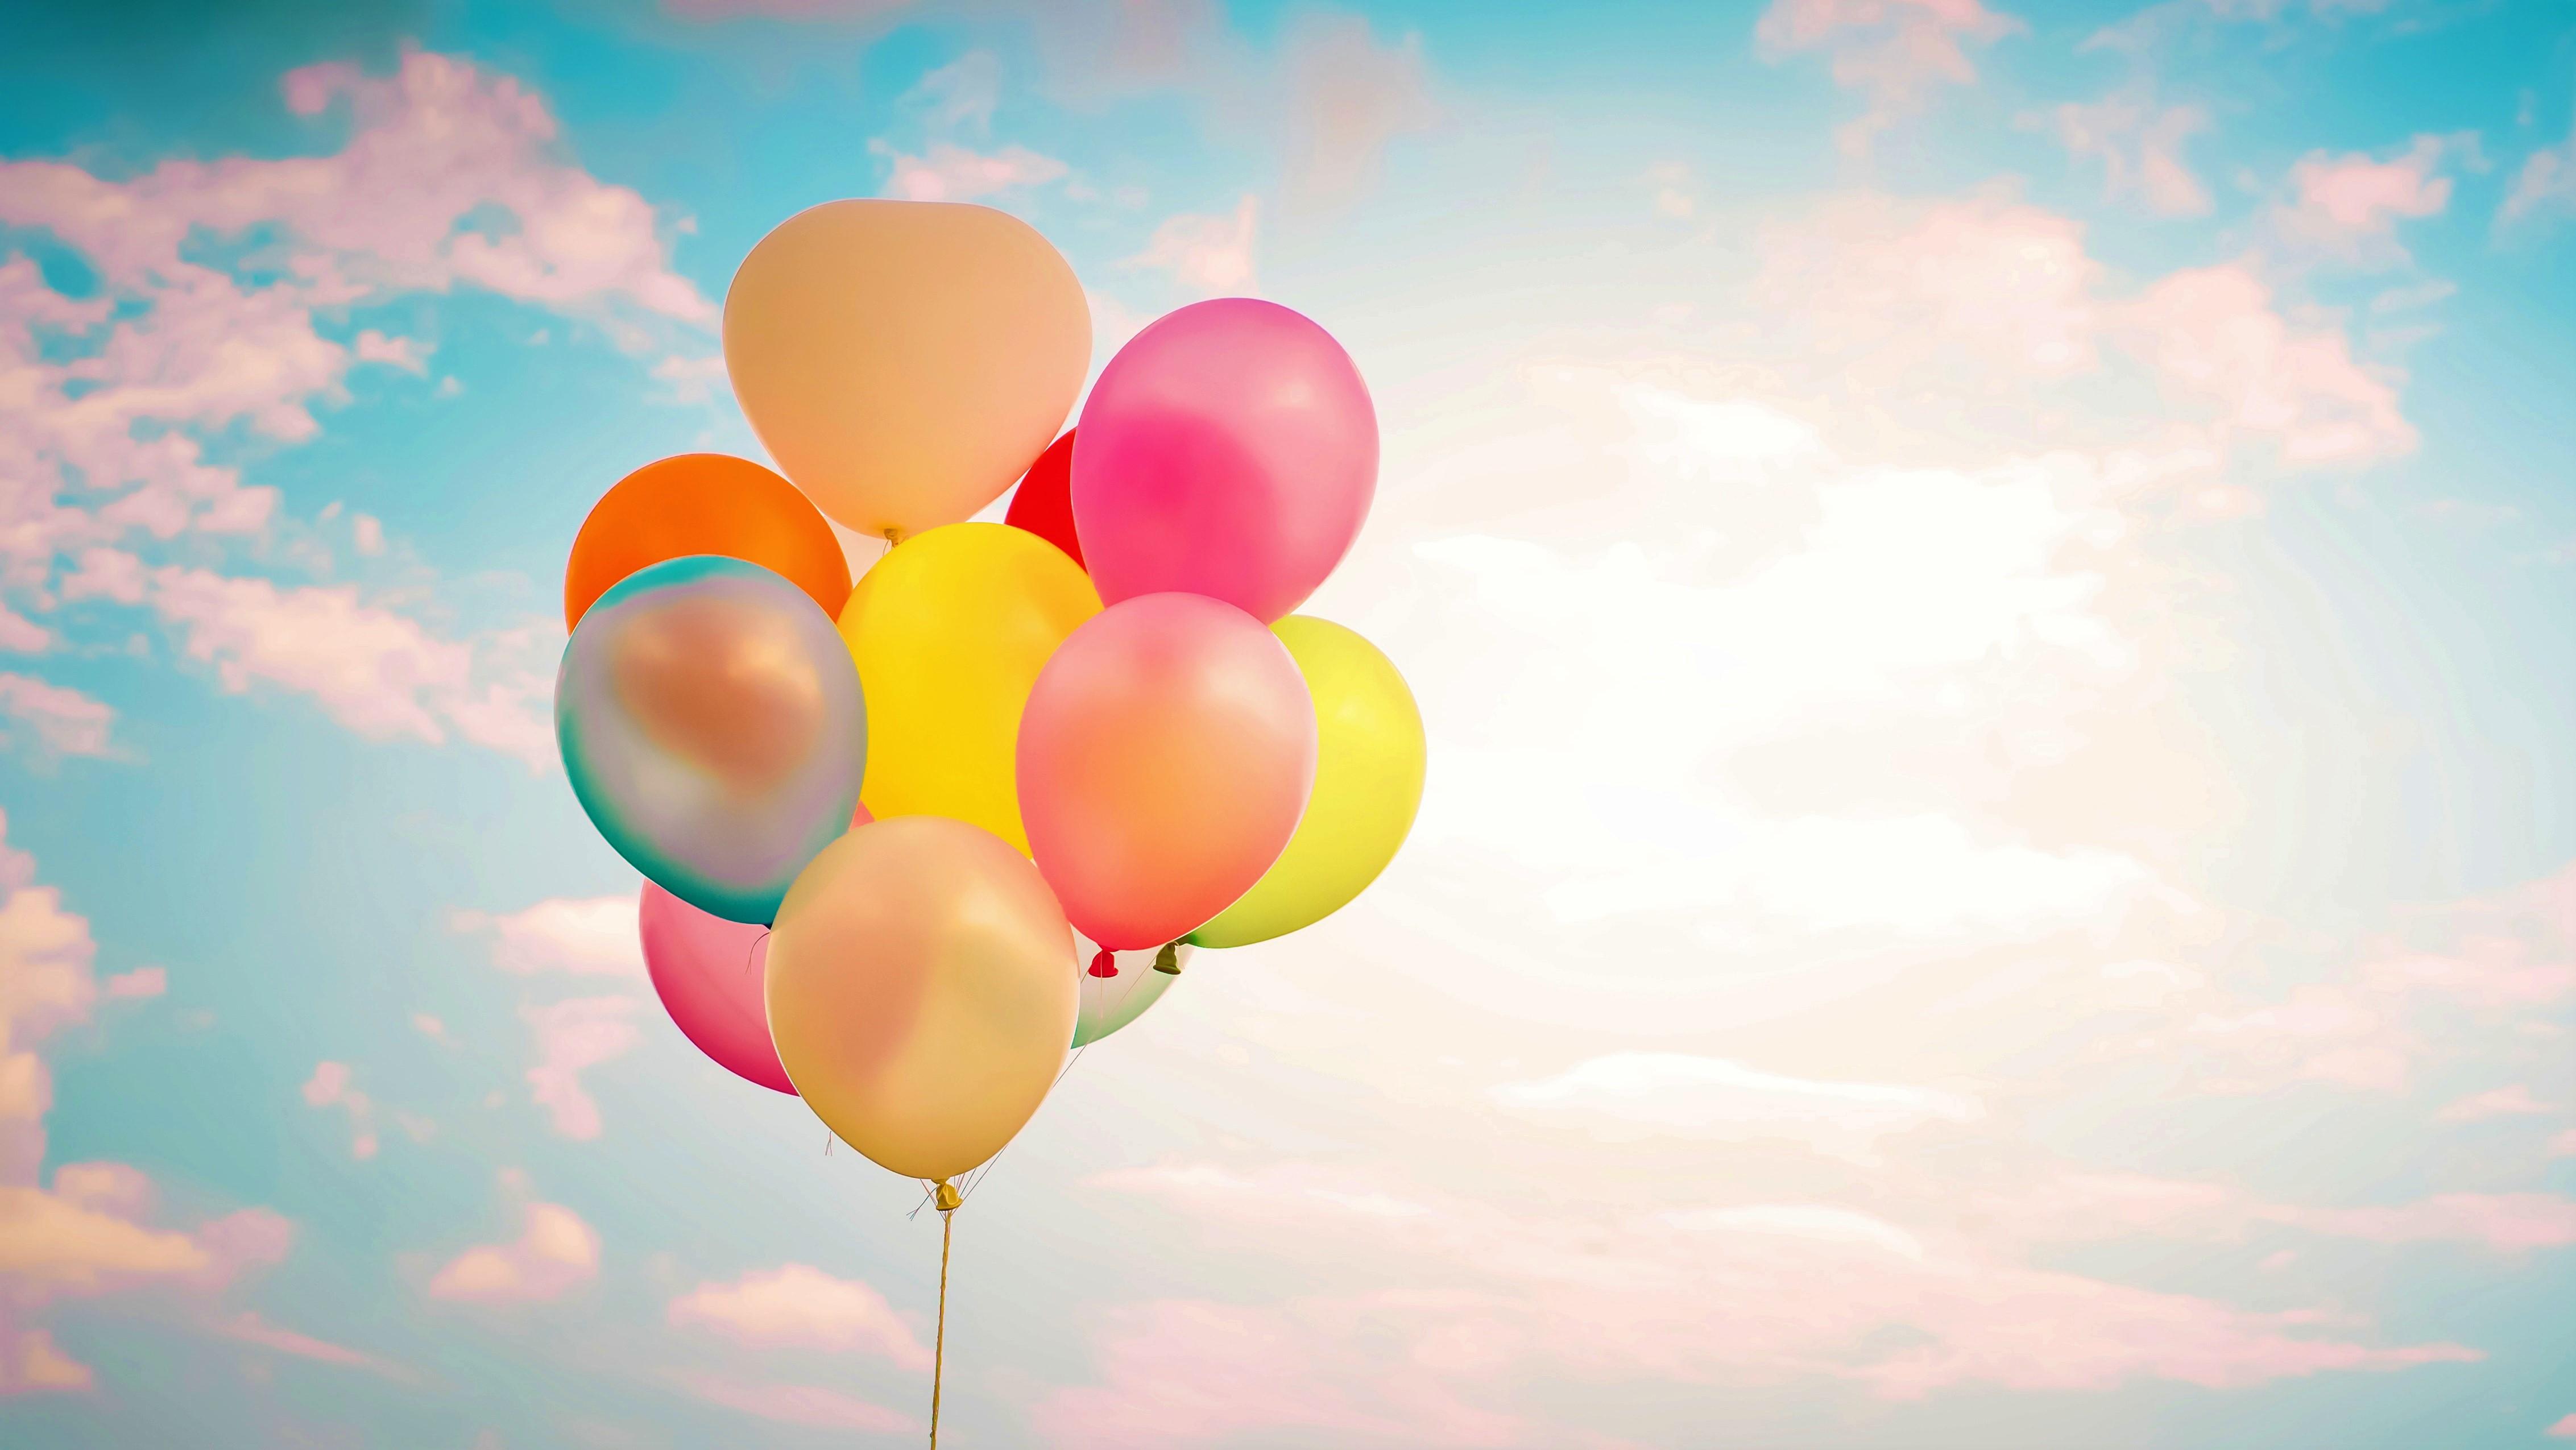 Colorful Balloons 4k Ultra HD Wallpaper. Background Image